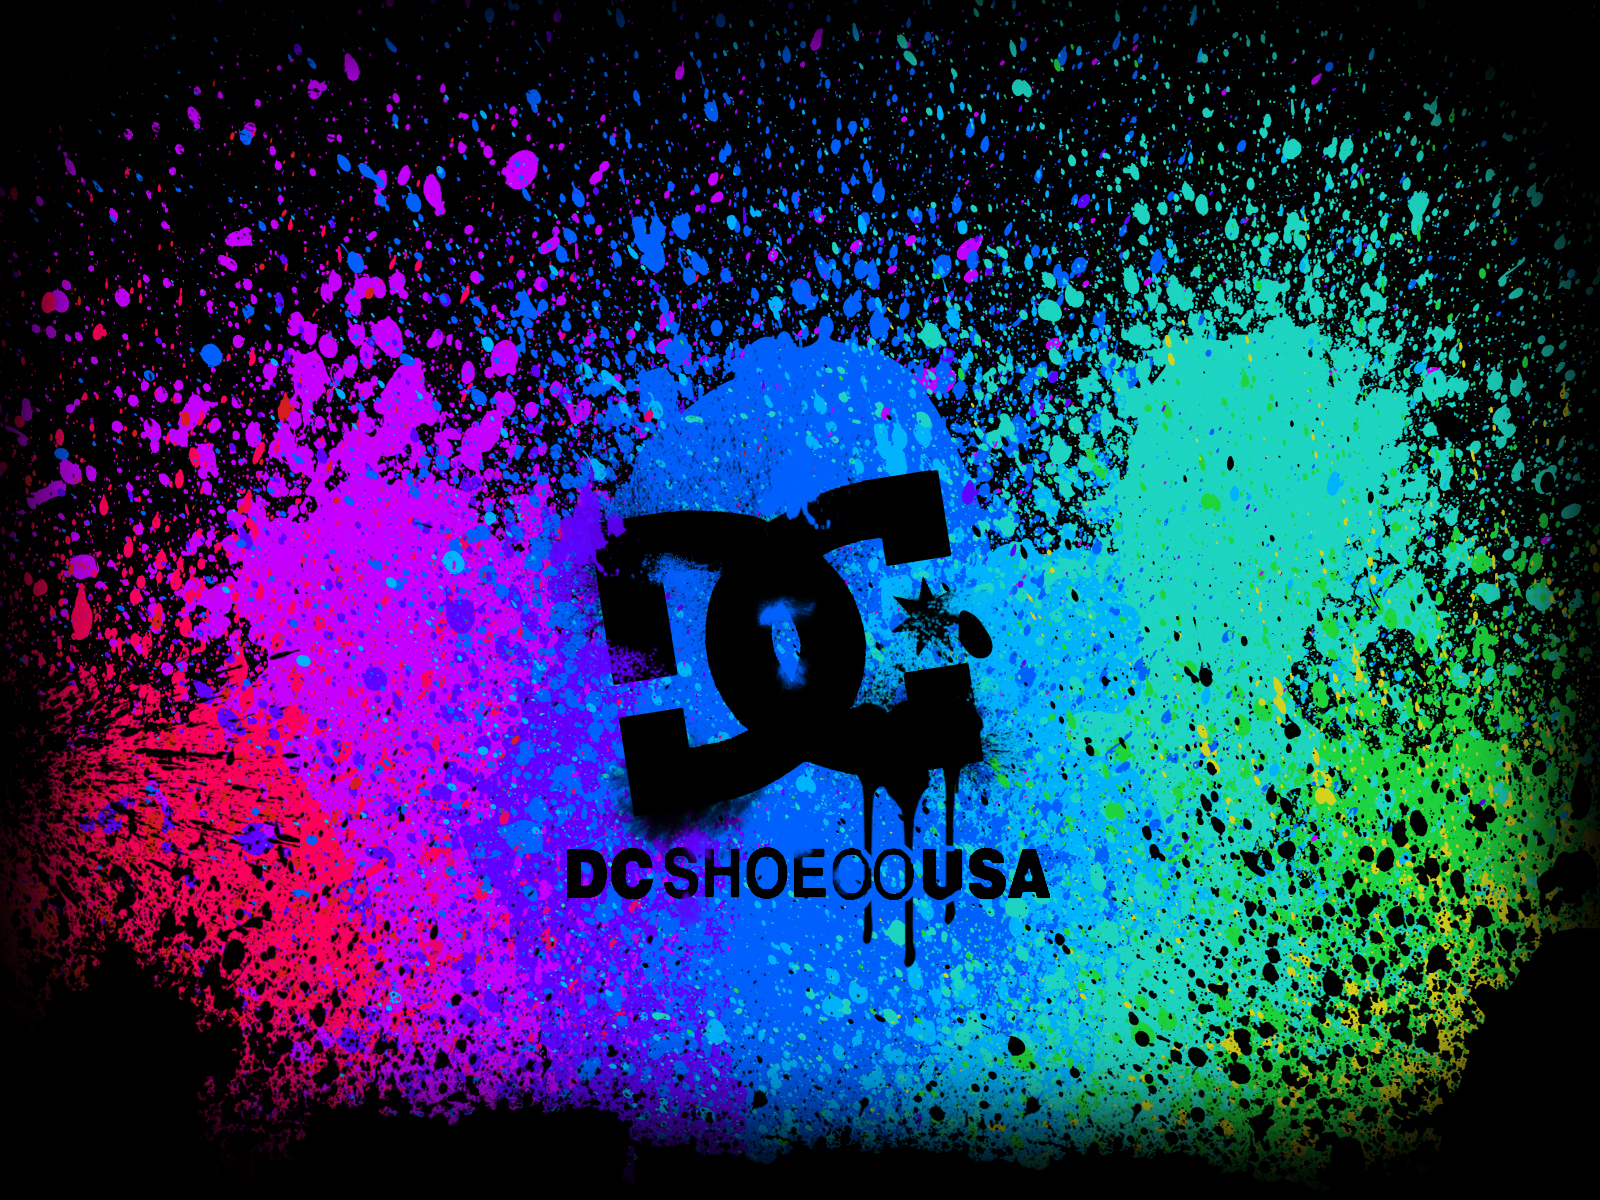 Free Download Hd Dc Shoes Logo Wallpapers 1600x10 For Your Desktop Mobile Tablet Explore 76 Dc Shoes Wallpaper Dc Logo Wallpaper Dc Shoes Logo Wallpaper Dc Shoes Logo Ipod Wallpaper